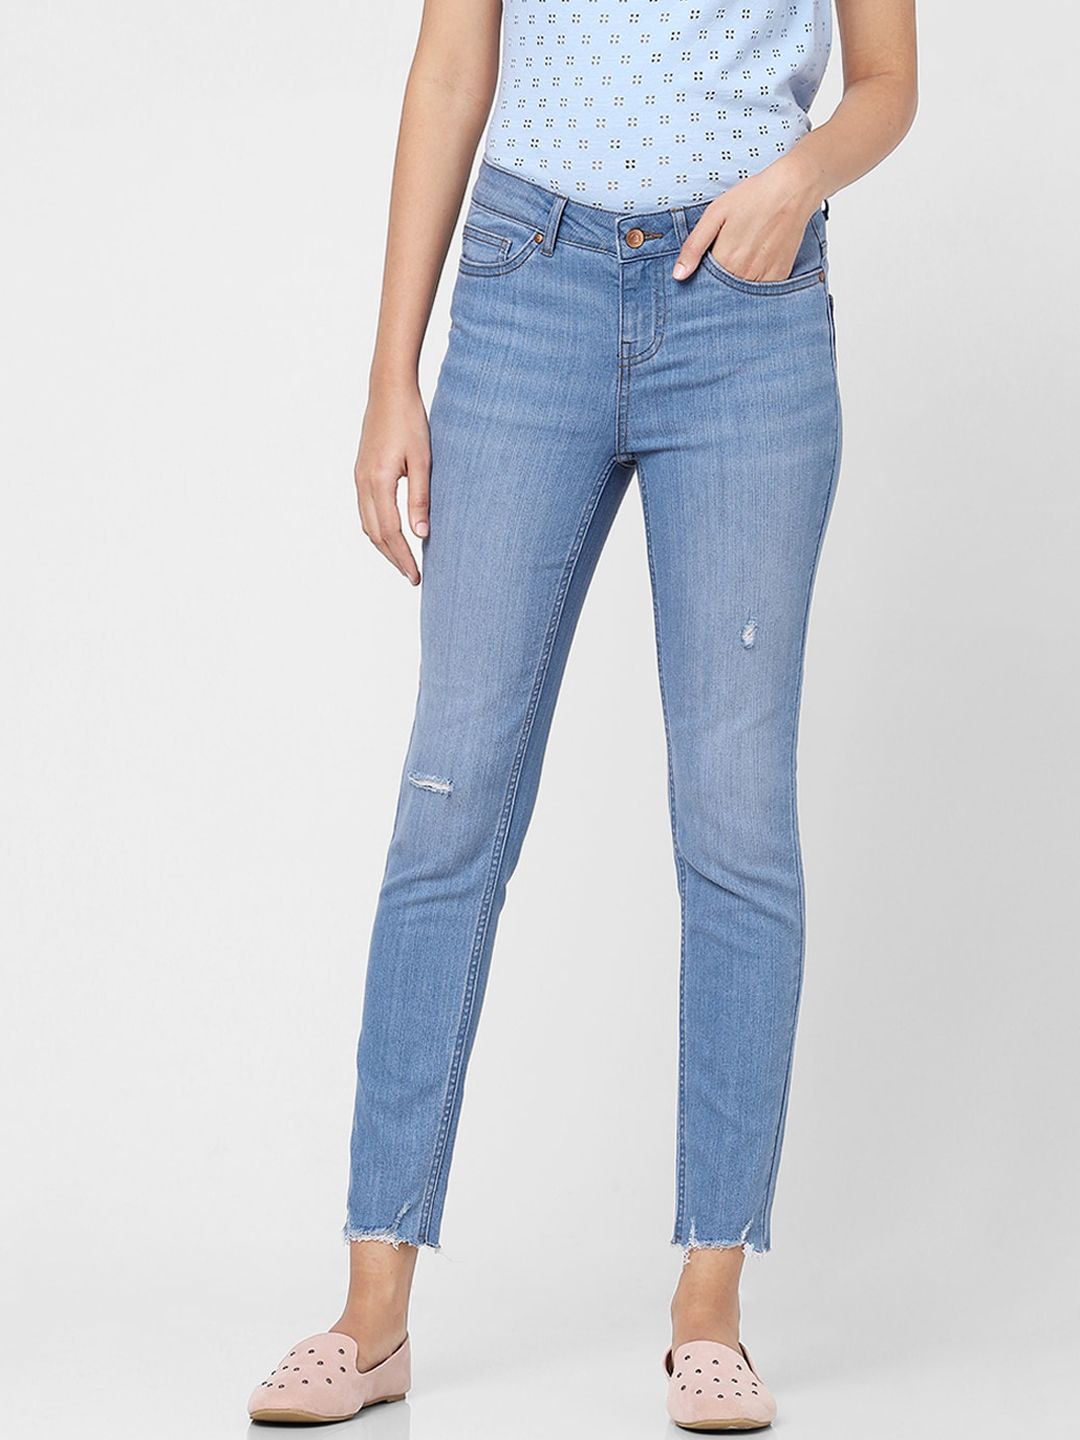 Vero Moda Women Blue Skinny Fit Mildly Distressed Light Fade Jeans Price in India